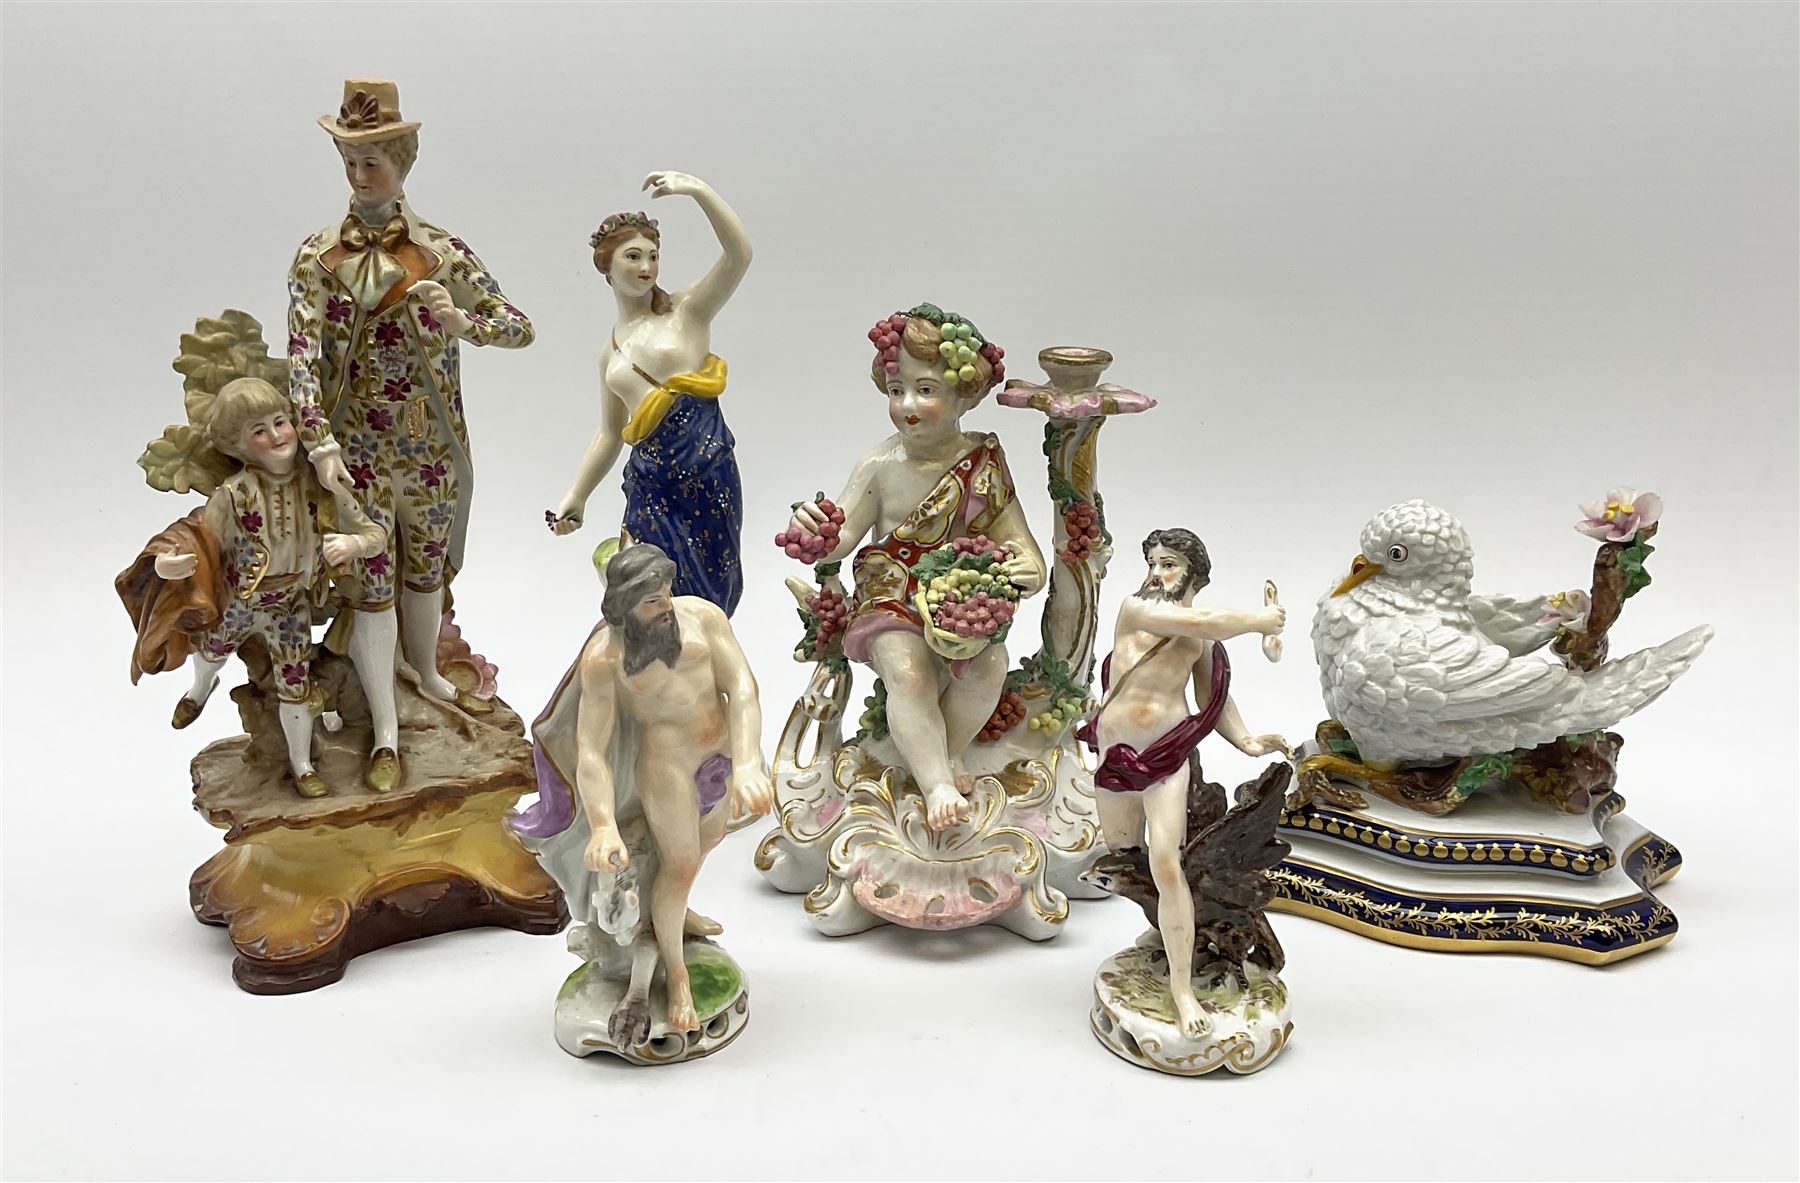 A group of assorted figures